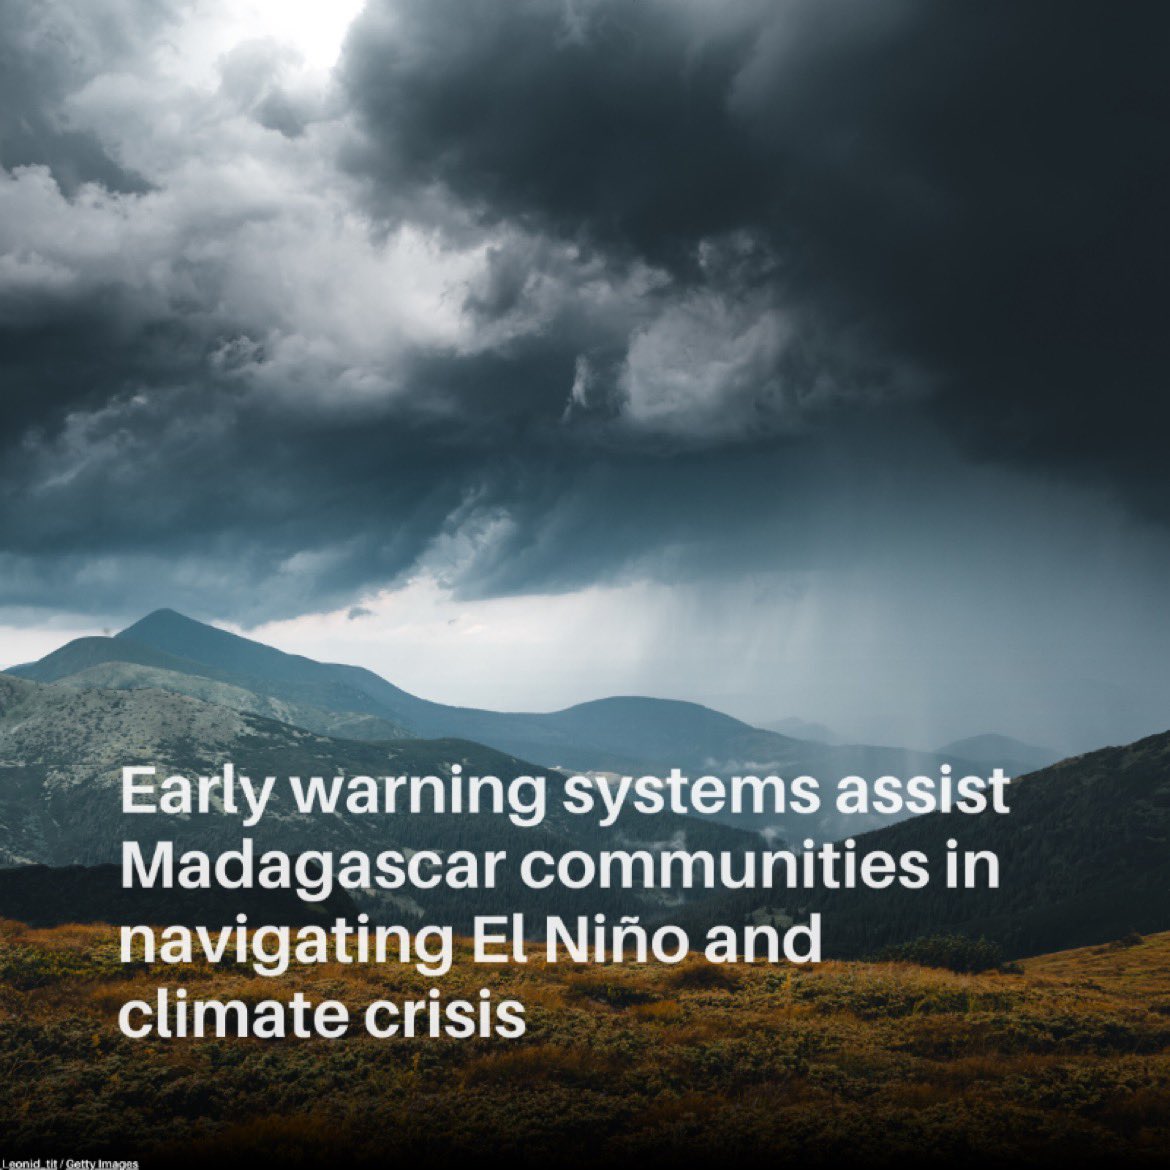 With human-induced climate change leading to more extreme weather conditions, early warning systems are crucial for saving lives and reducing economic losses.

#ClimateActionNow
#EarlyWarningSystems
#SaveLivesReduceLosses

@Greenisamissio1 @nzasap3 @EnvironmentEEYE @AbiluTangwa